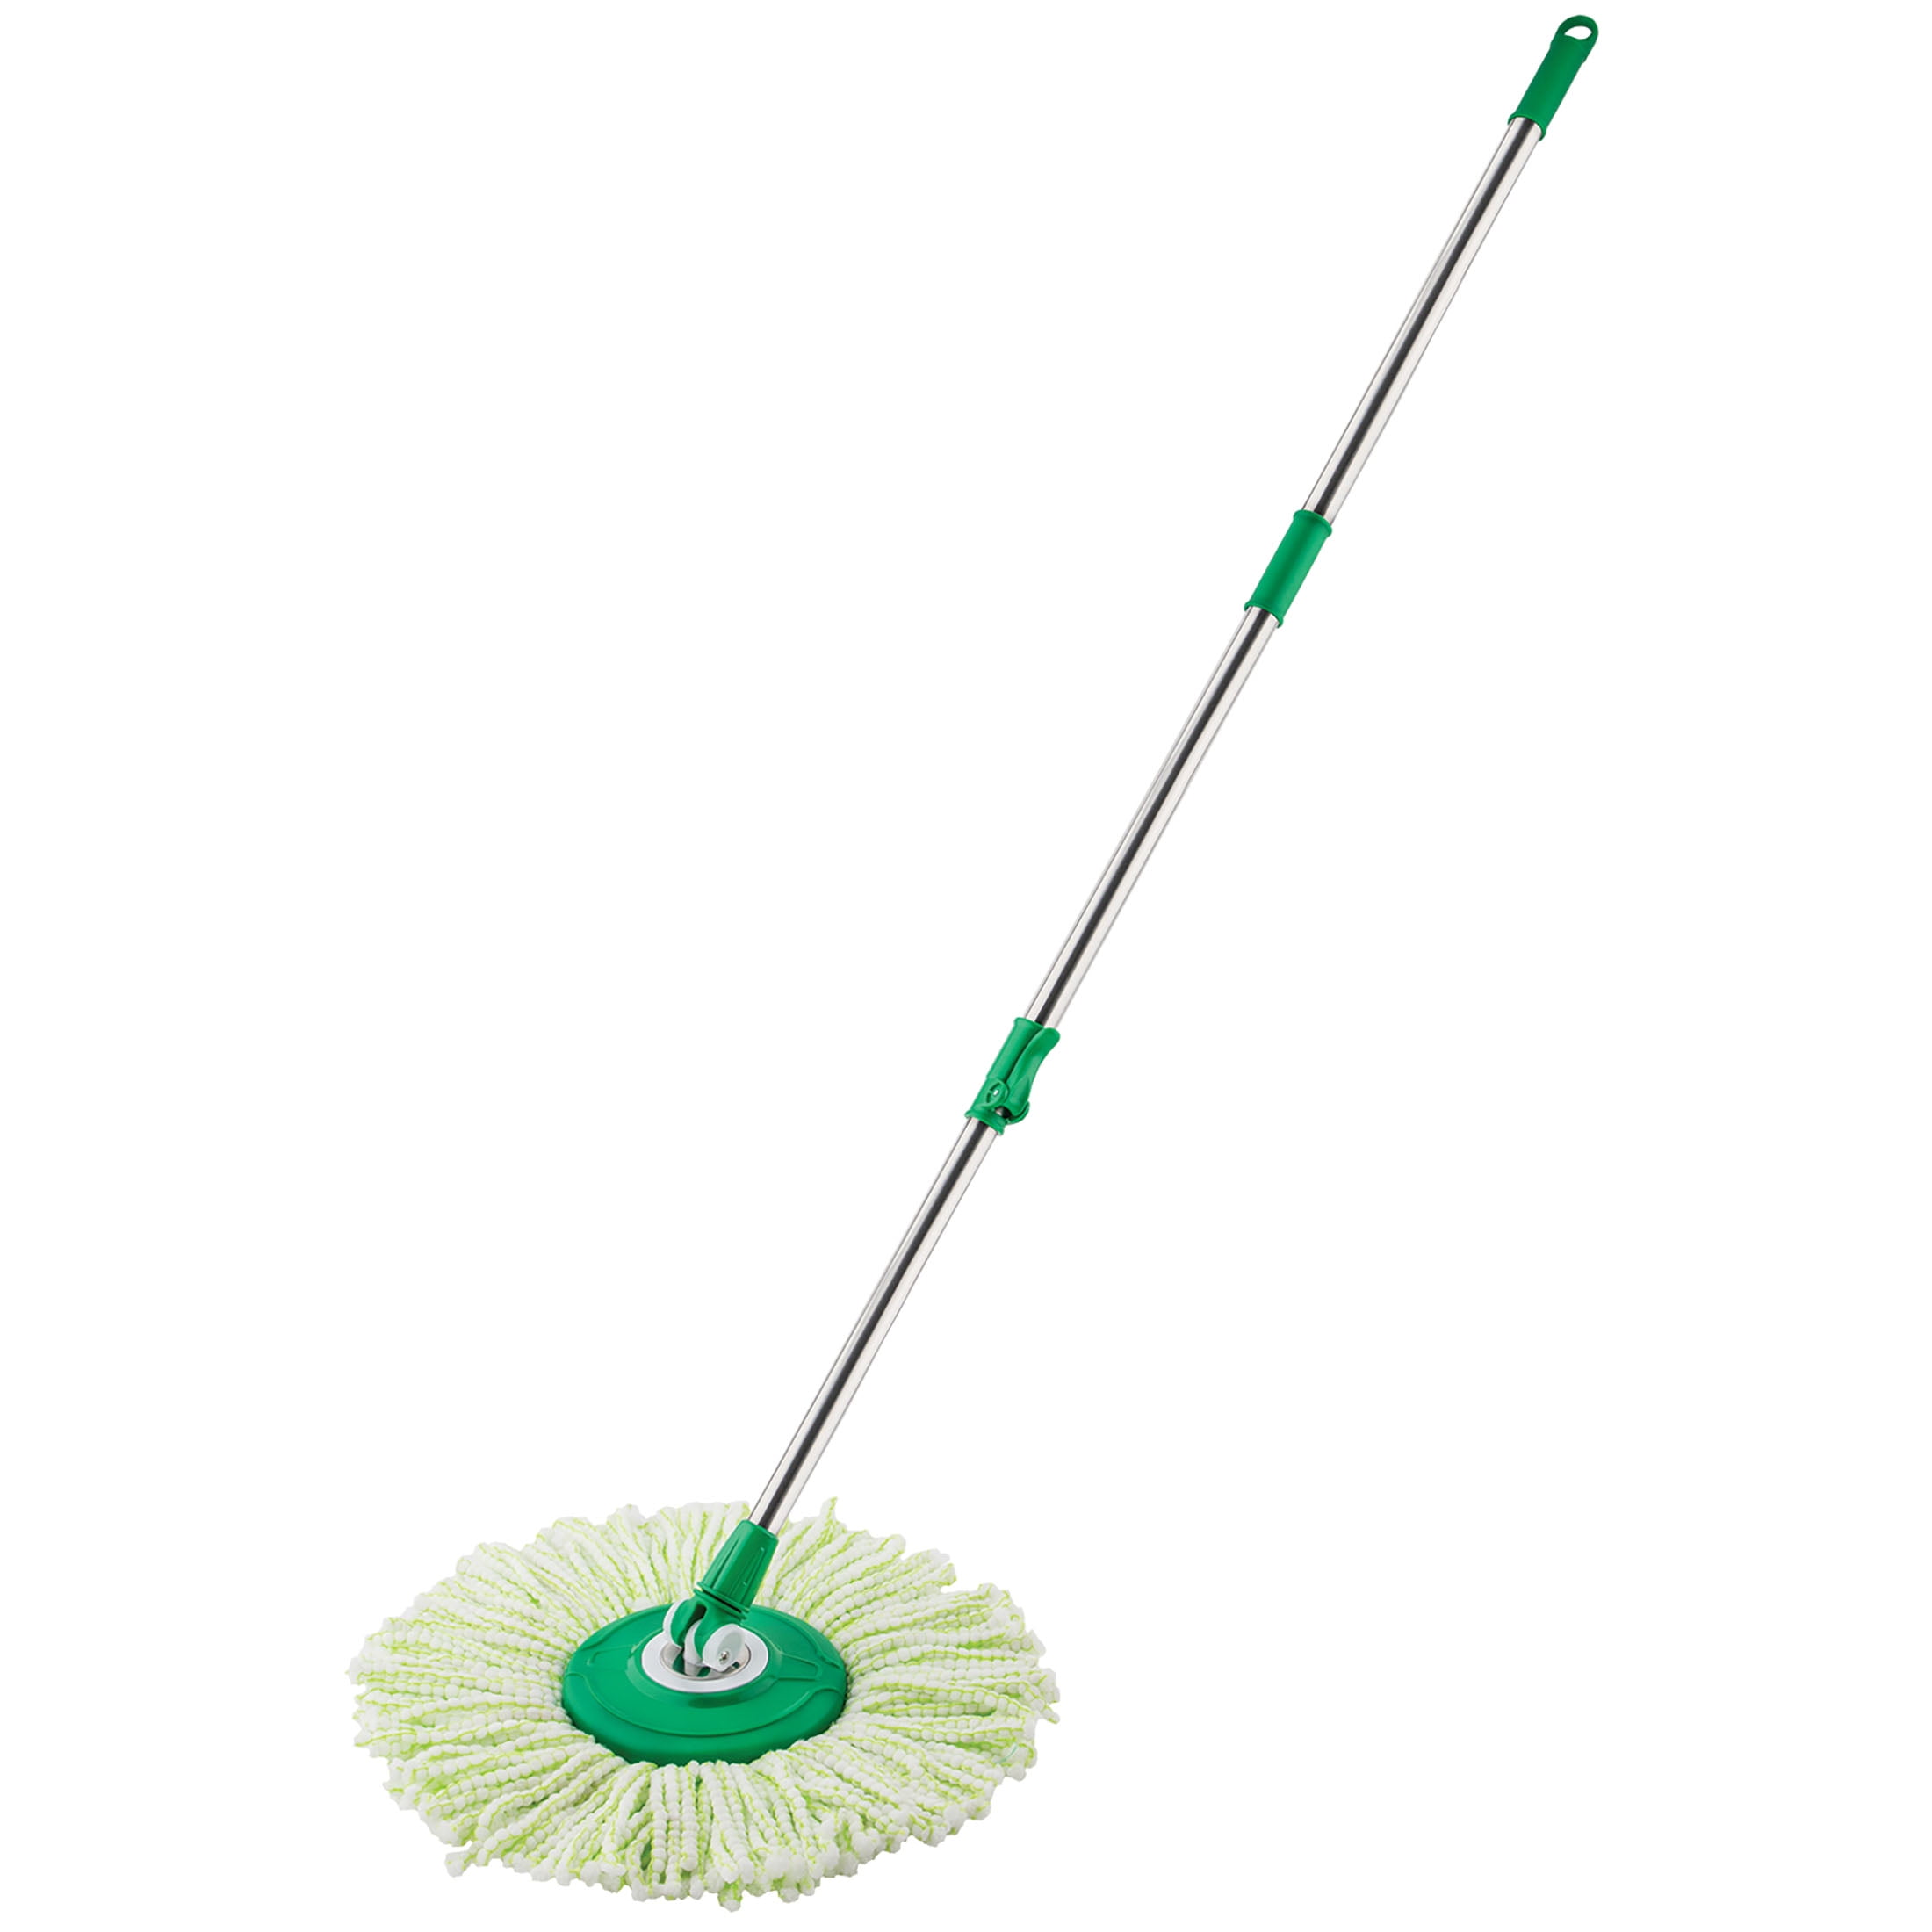 Libman Microfiber Tornado Wet Spin Mop and Bucket Floor Cleaning System with 4 Refills, Green & White